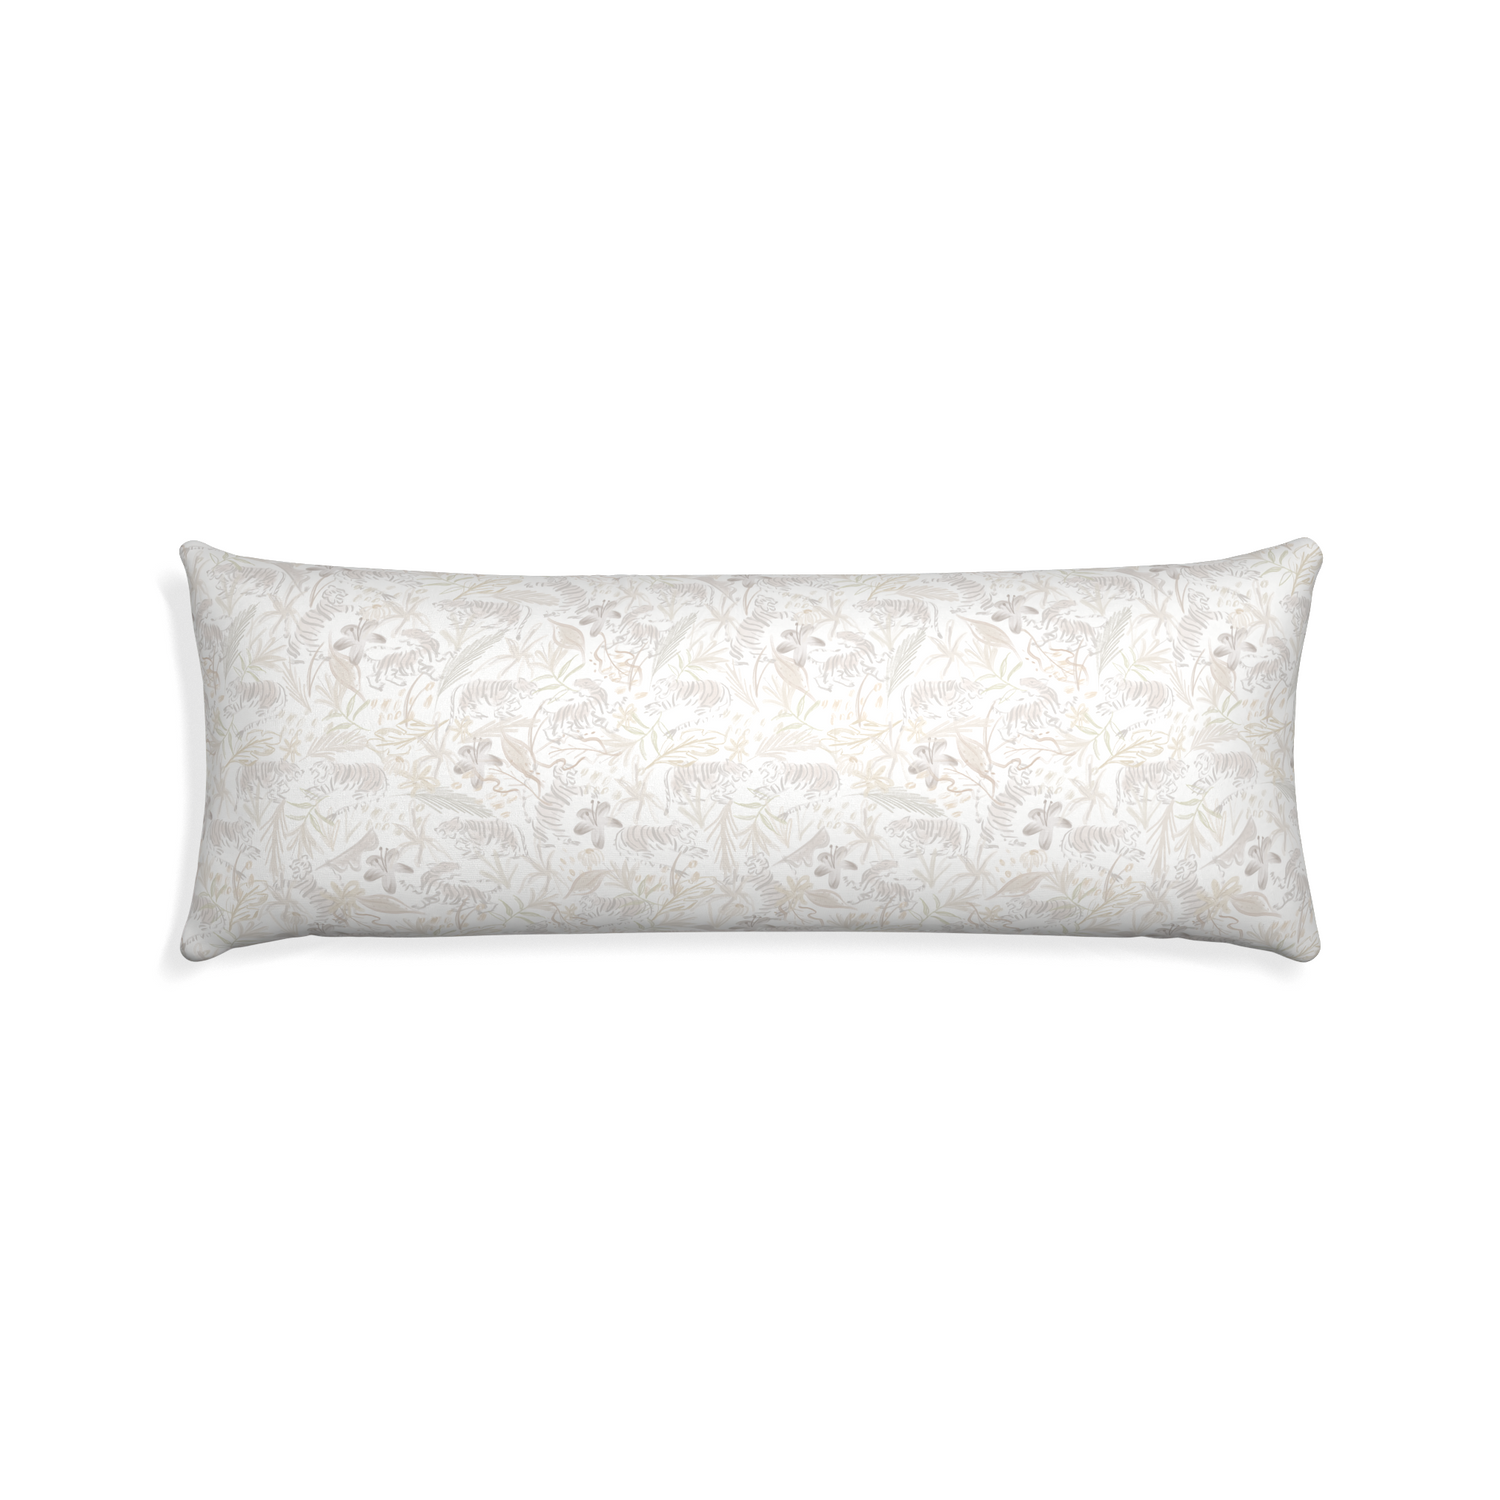 Xl-lumbar frida sand custom pillow with none on white background